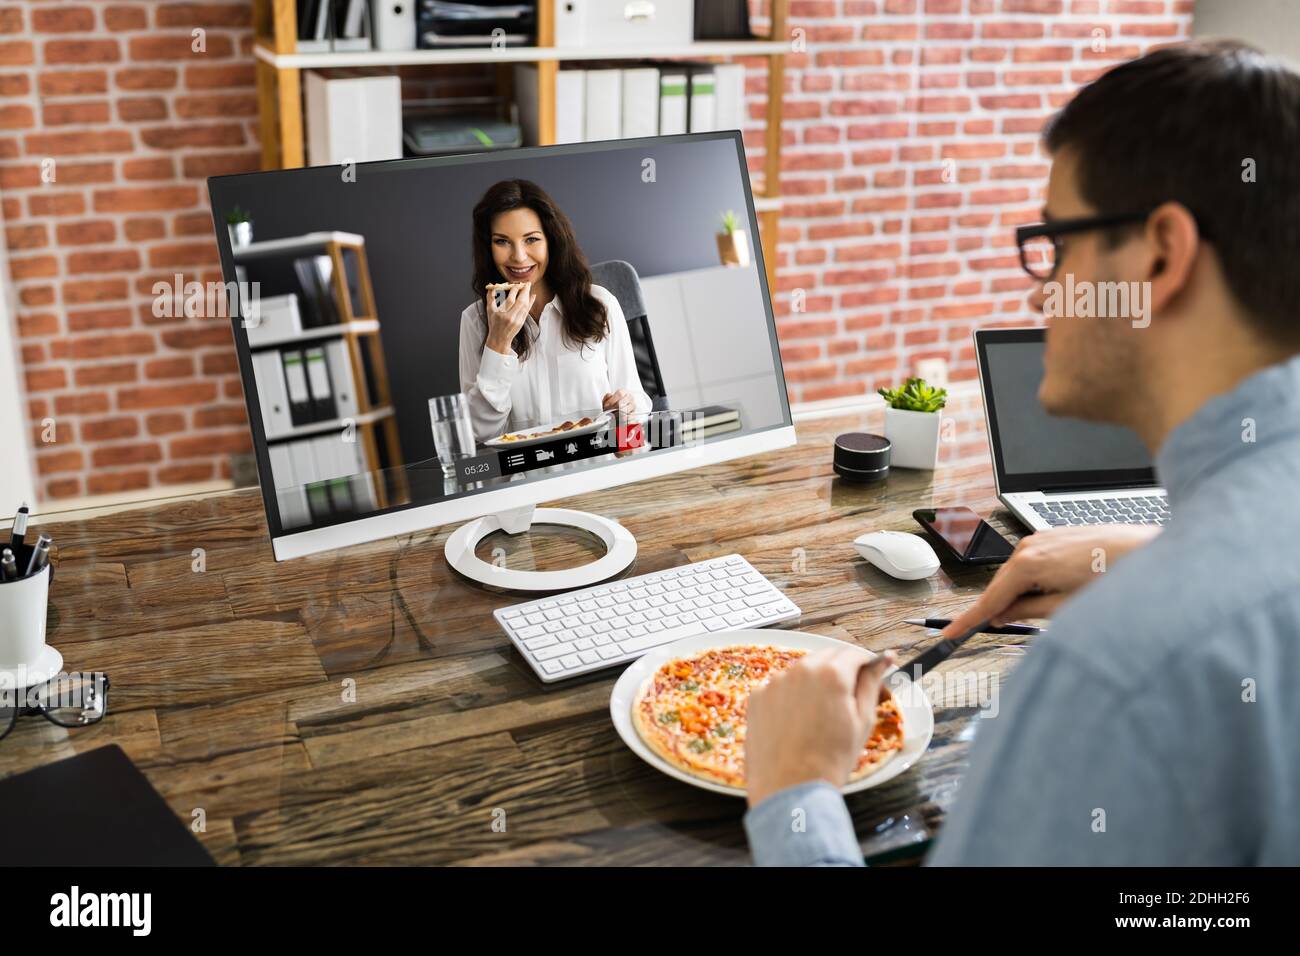 Virtual Office Lunch Break Using Online Video Conference Stock Photo